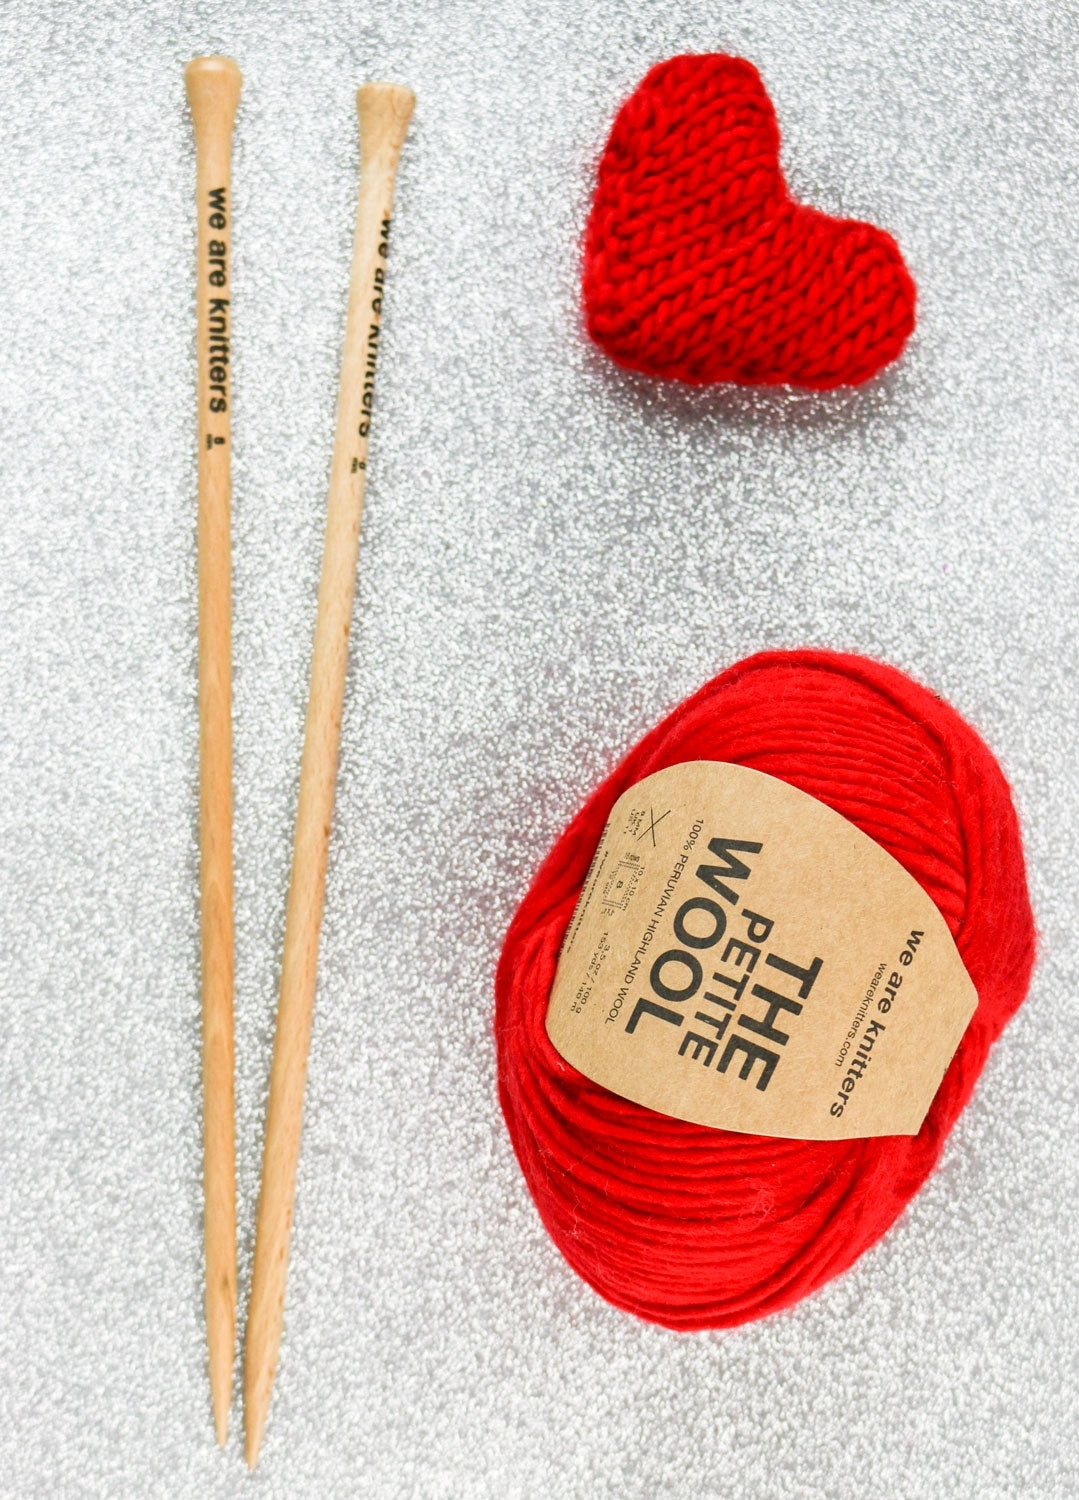 14 Free Heart Knitting Patterns to Make for your Valentines — Blog